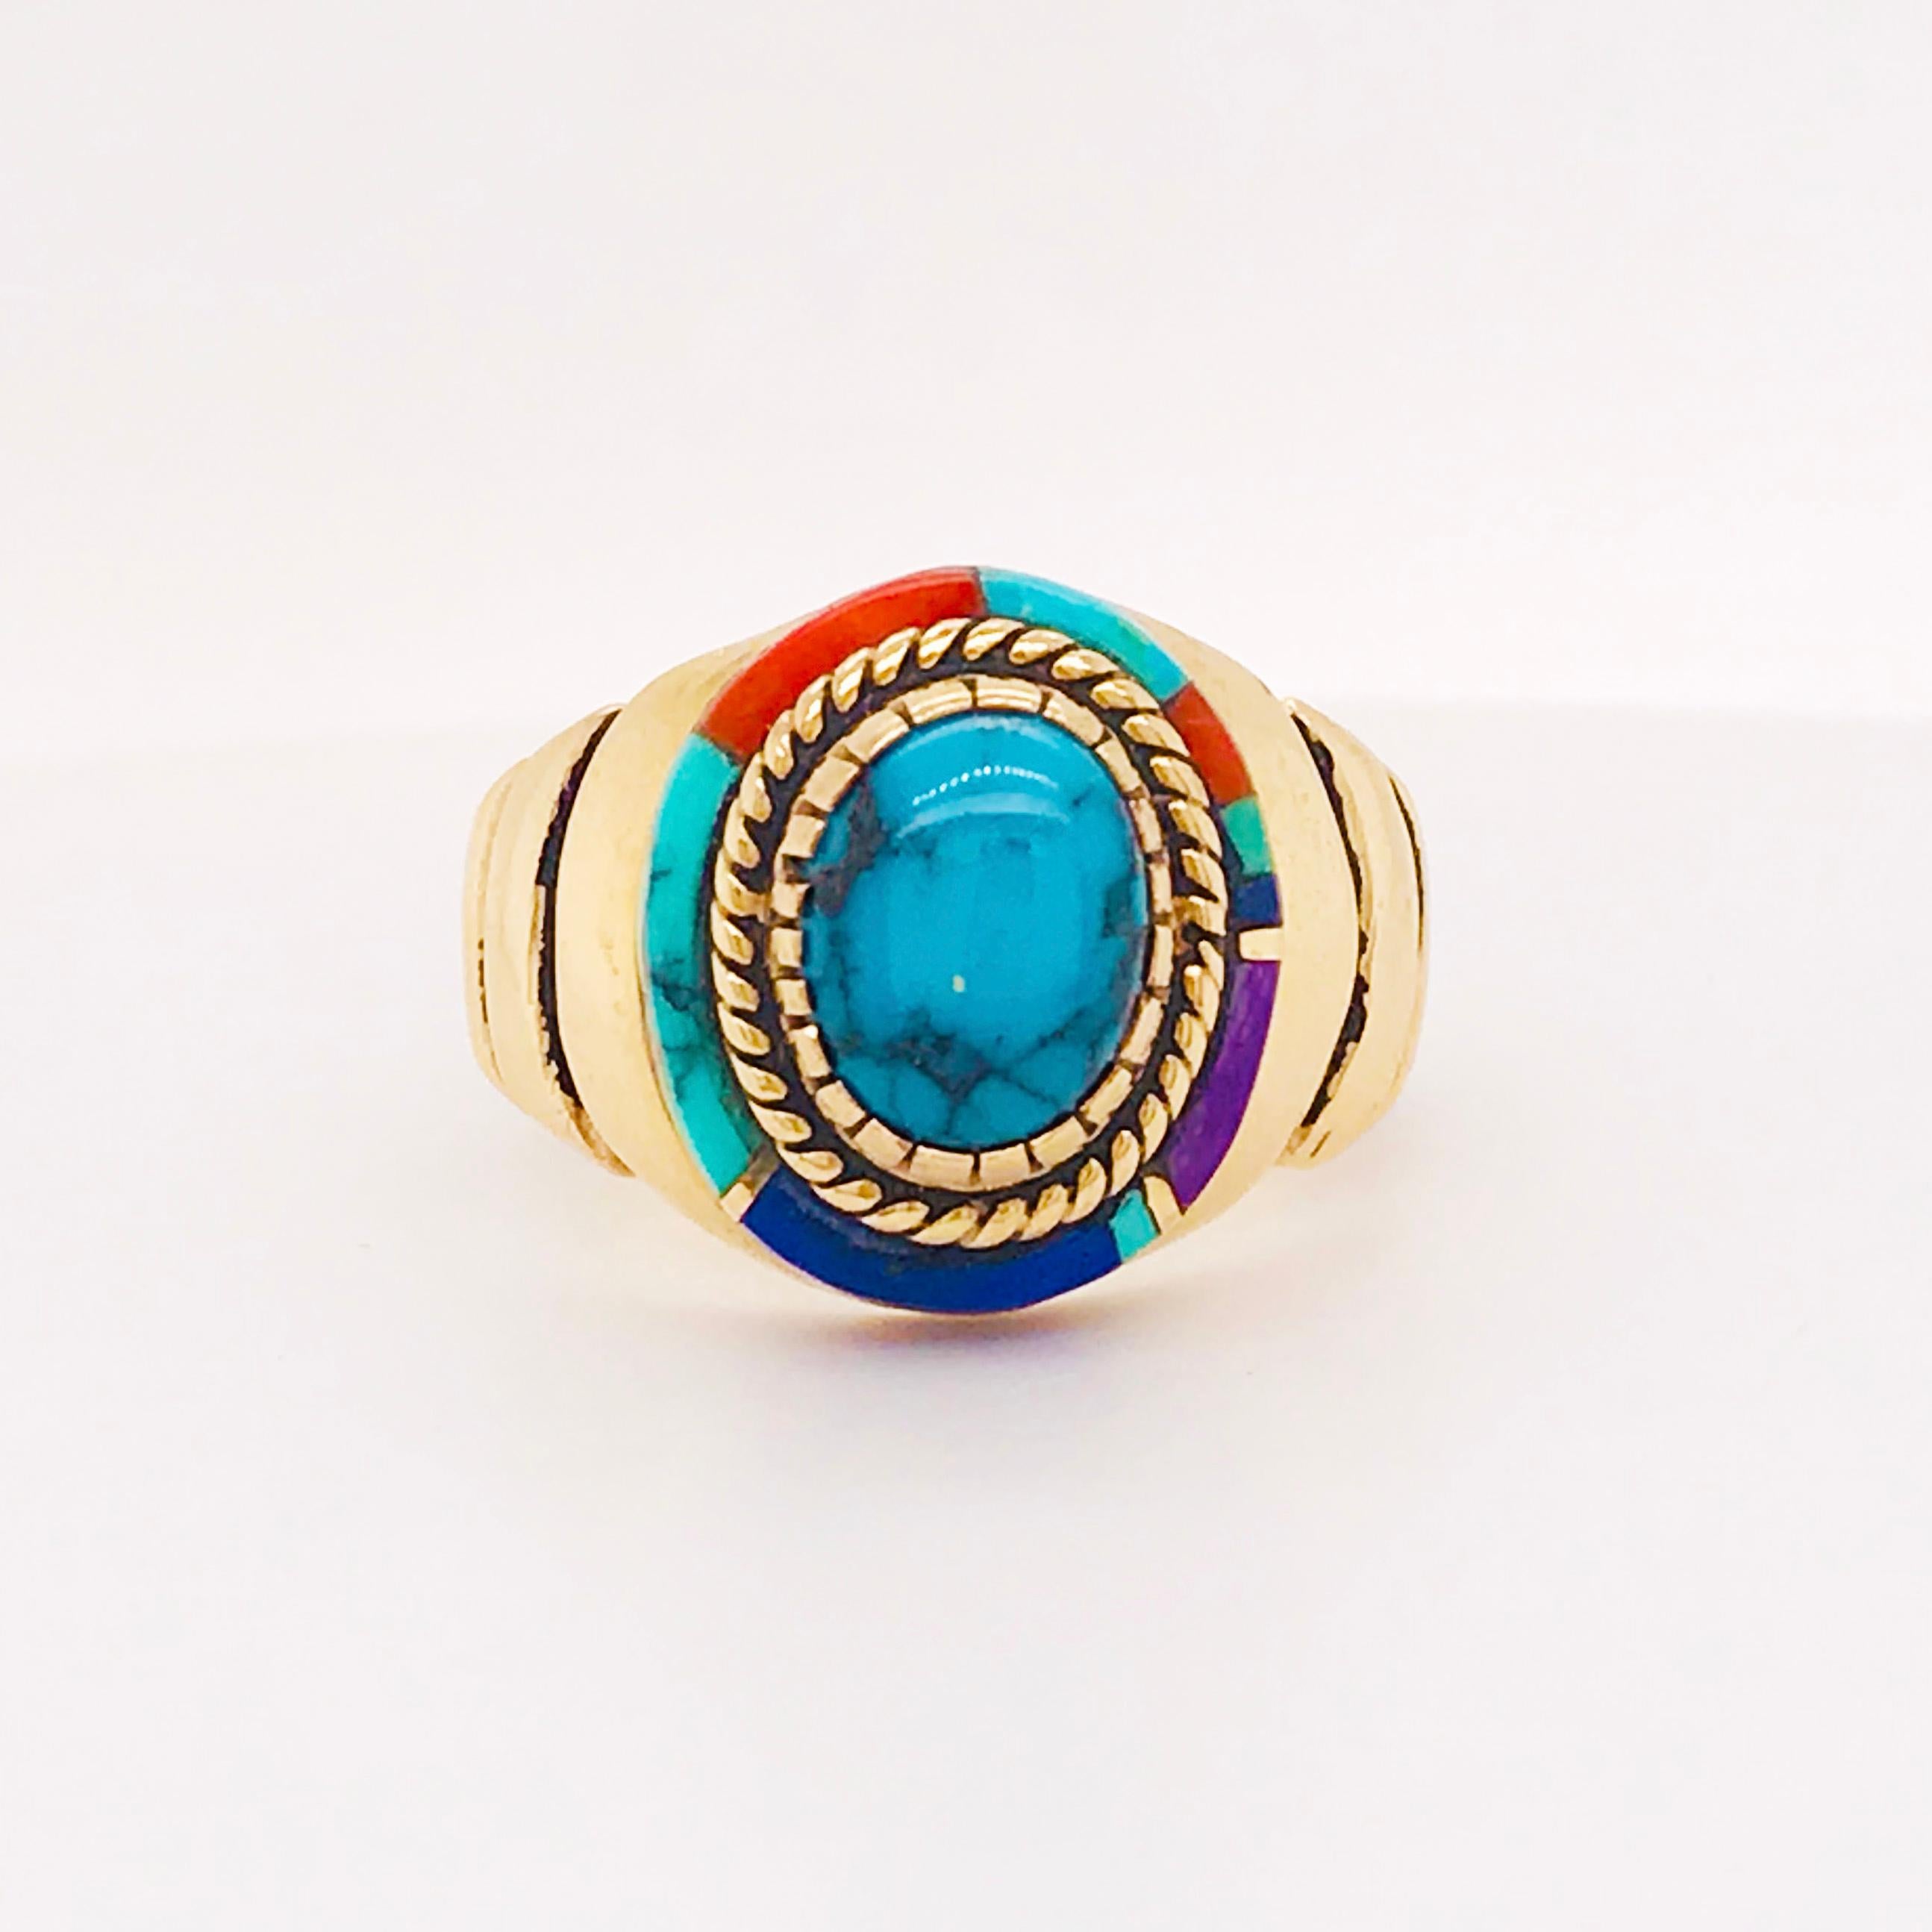 Oval Cut Turquoise Dome Ring, Coral, Lapis and Sugilite Inlay Custom 14 Karat Yellow Gold